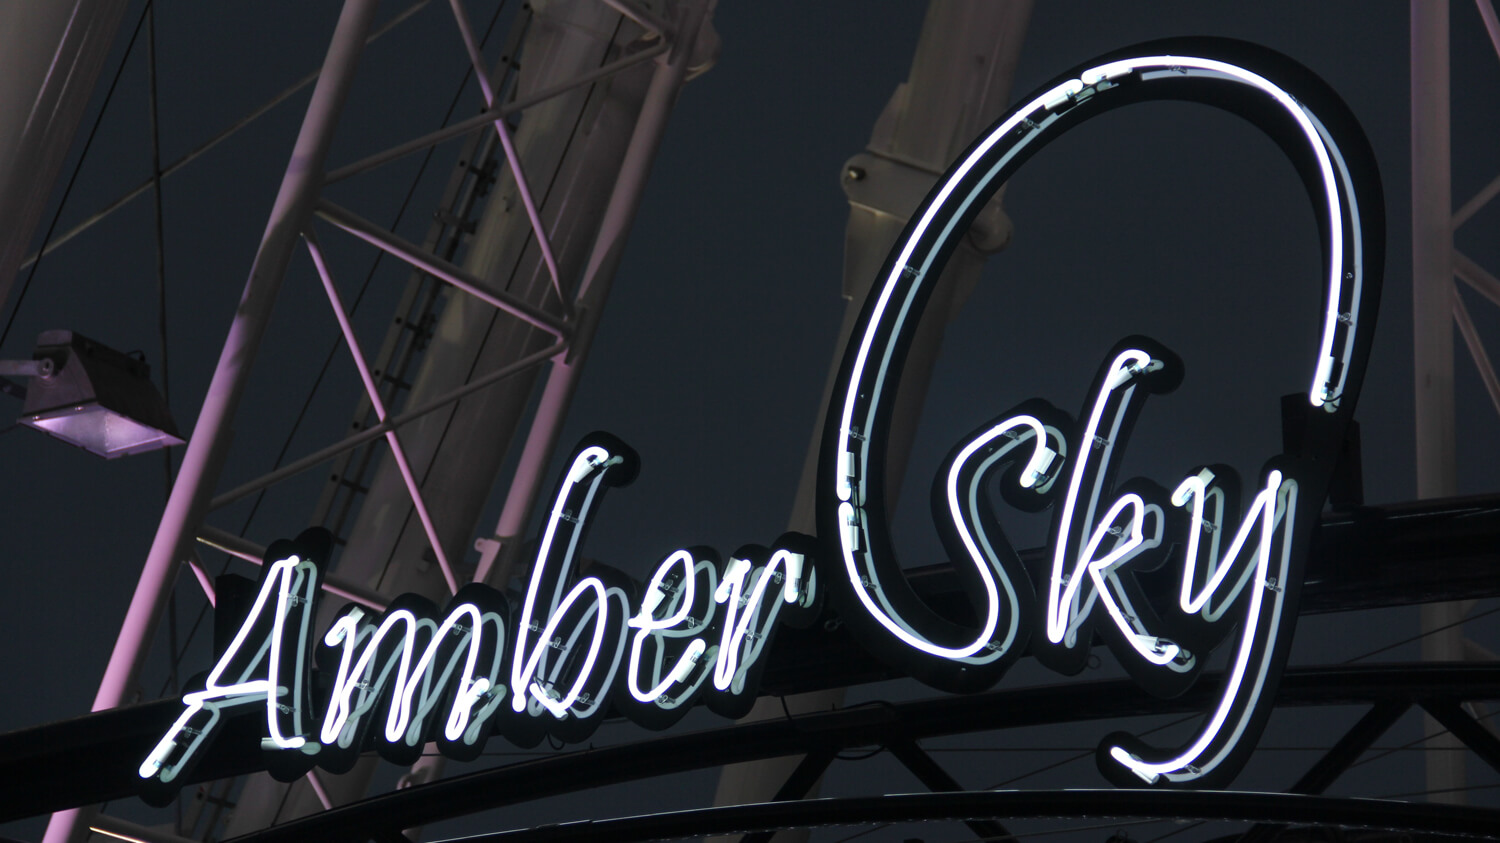 Amber Sky - Amber Sky - white neon sign with the company name placed on the rack